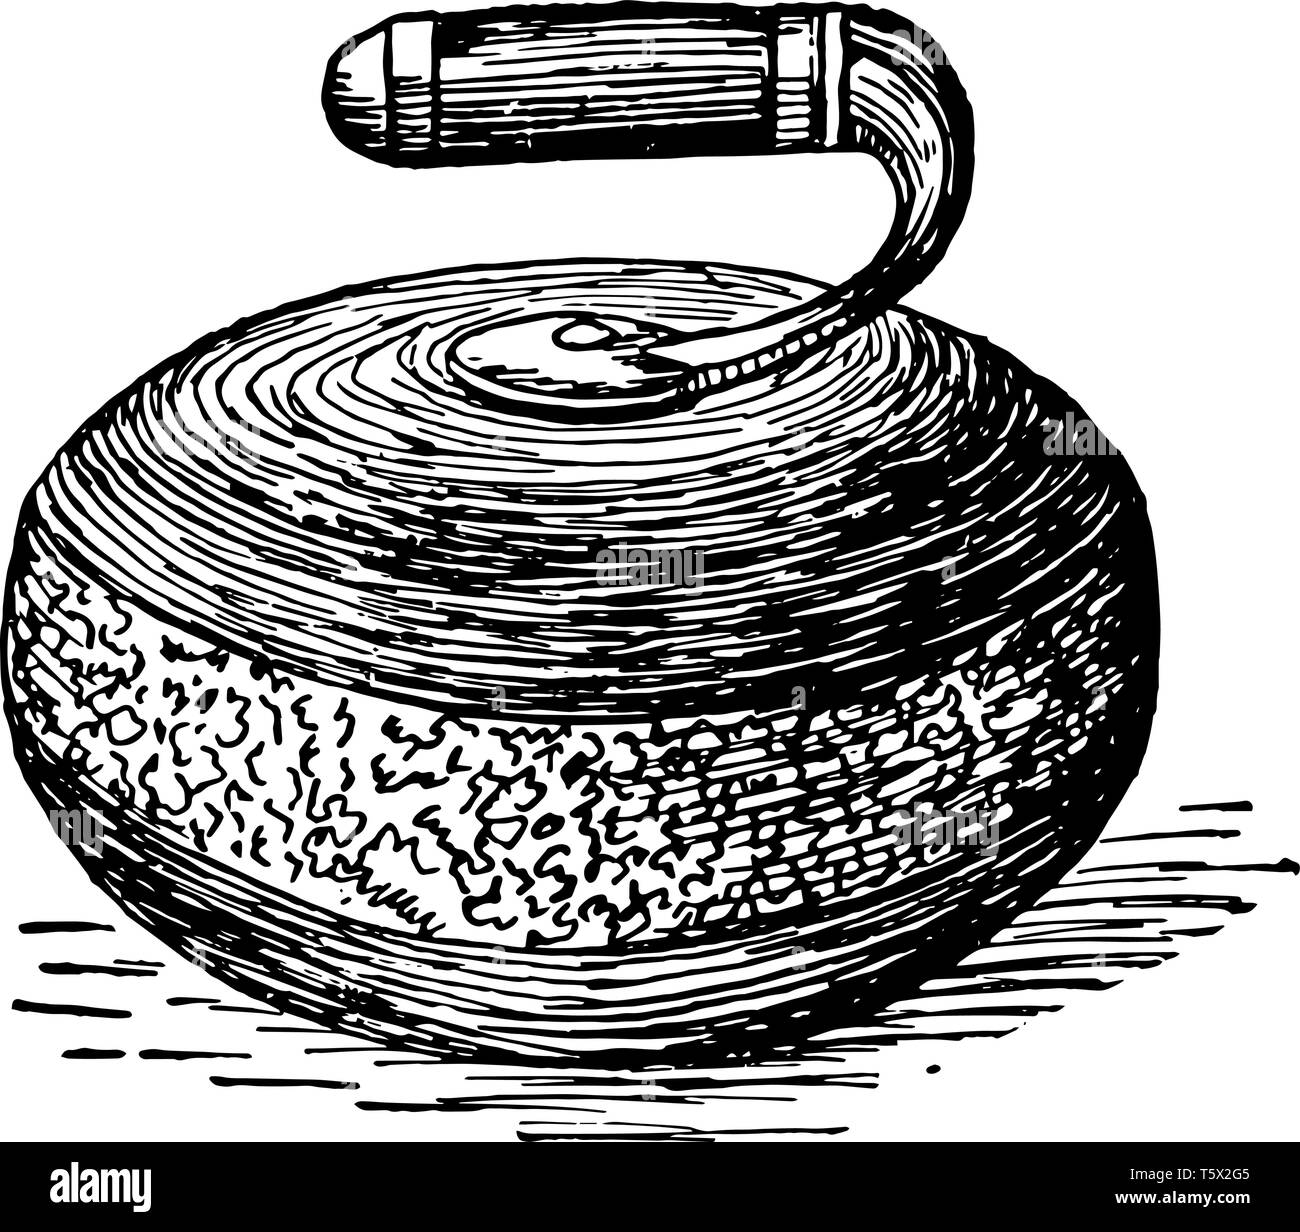 The curling stone of the sport of curling vintage line drawing or engraving illustration Stock Vector Image and Art